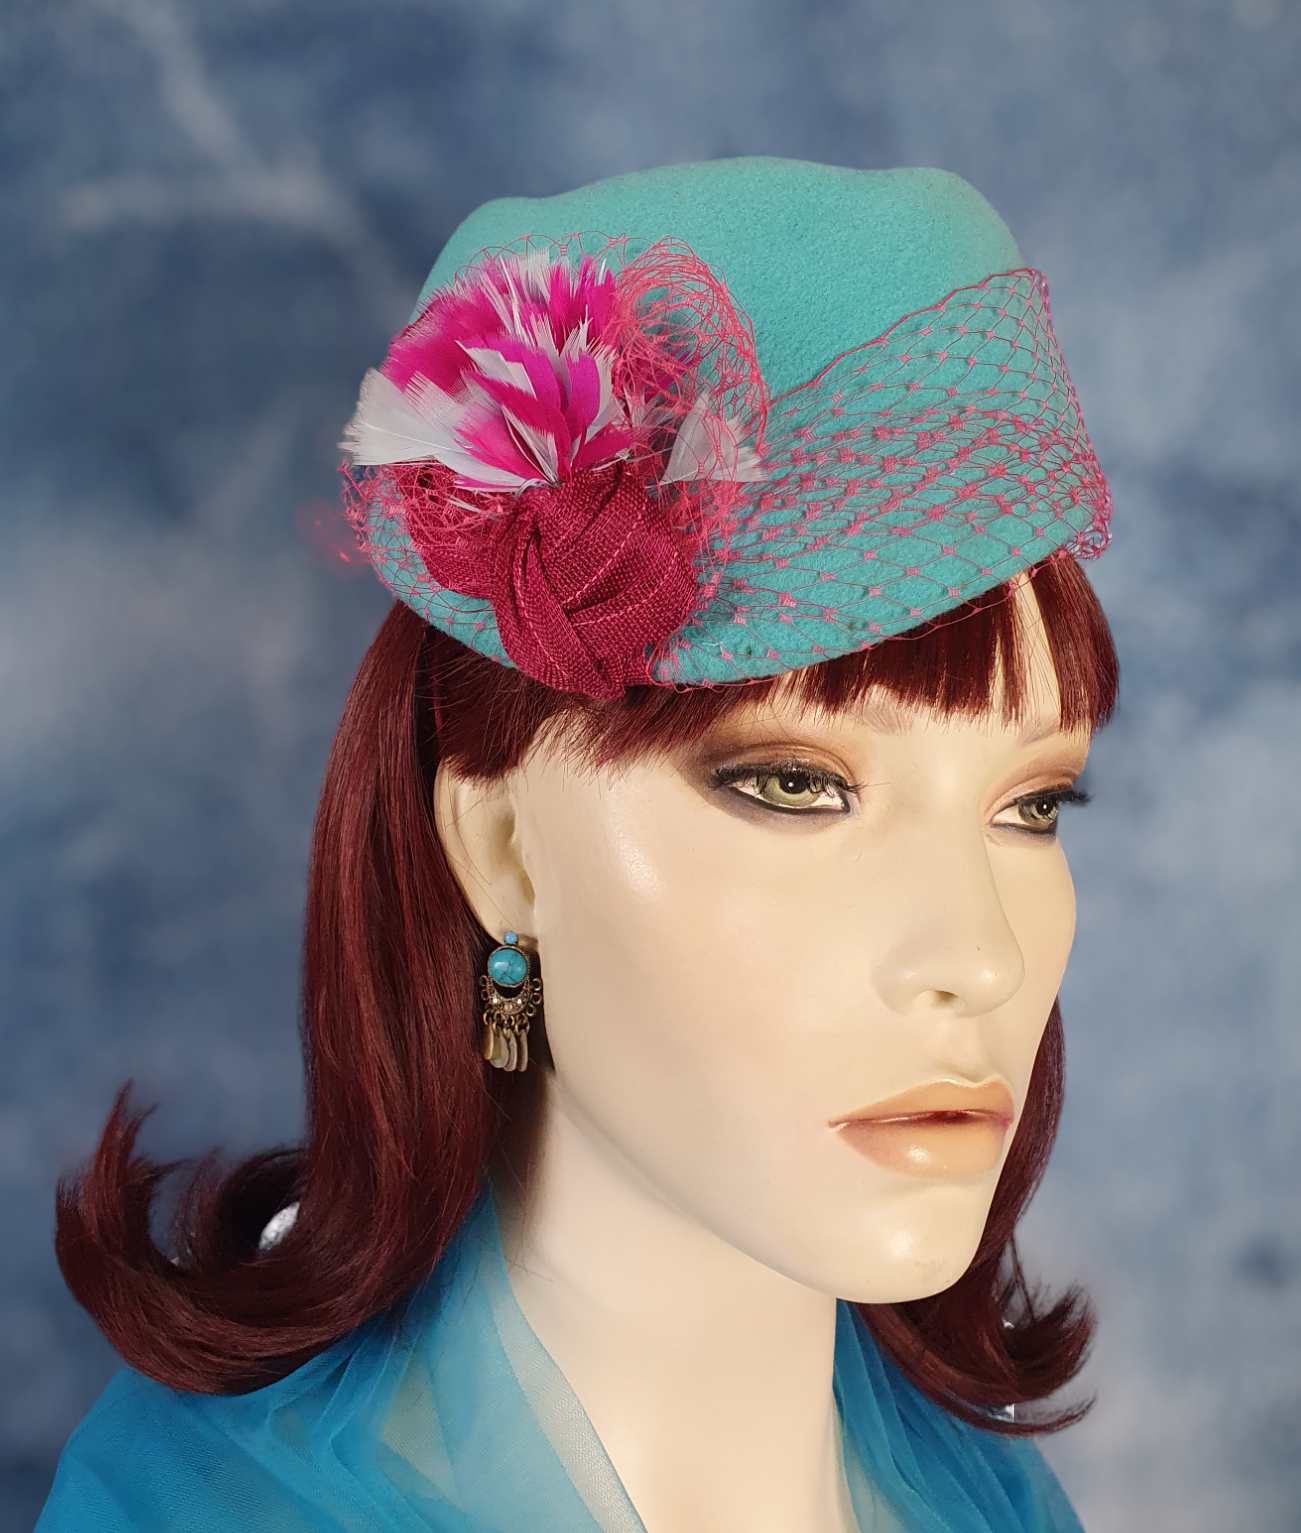 Handmade blue felt fascinator with pheasant feathers and abaca silk, elegant vintage pillbox women's hat for special occasions.